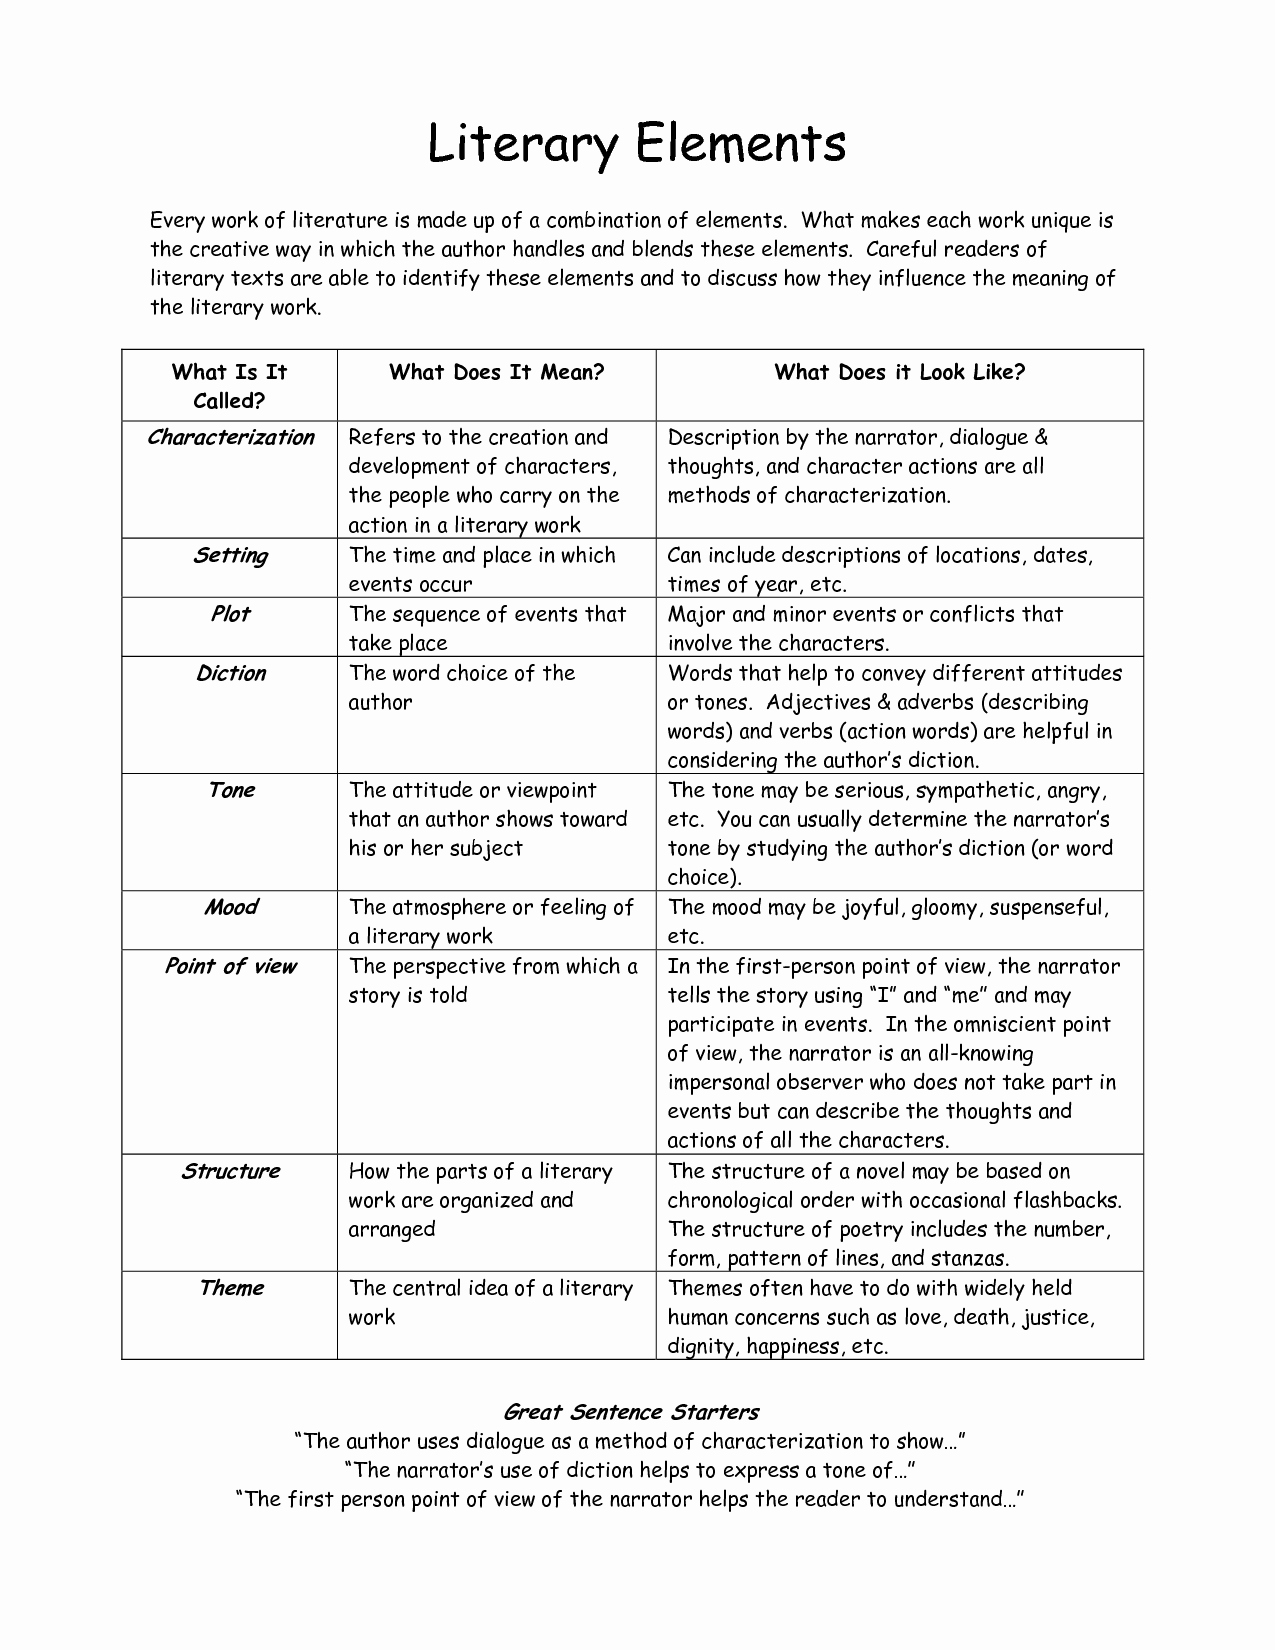 Literary Devices Worksheet Pdf Awesome 15 Best Of Elements Literature Worksheets